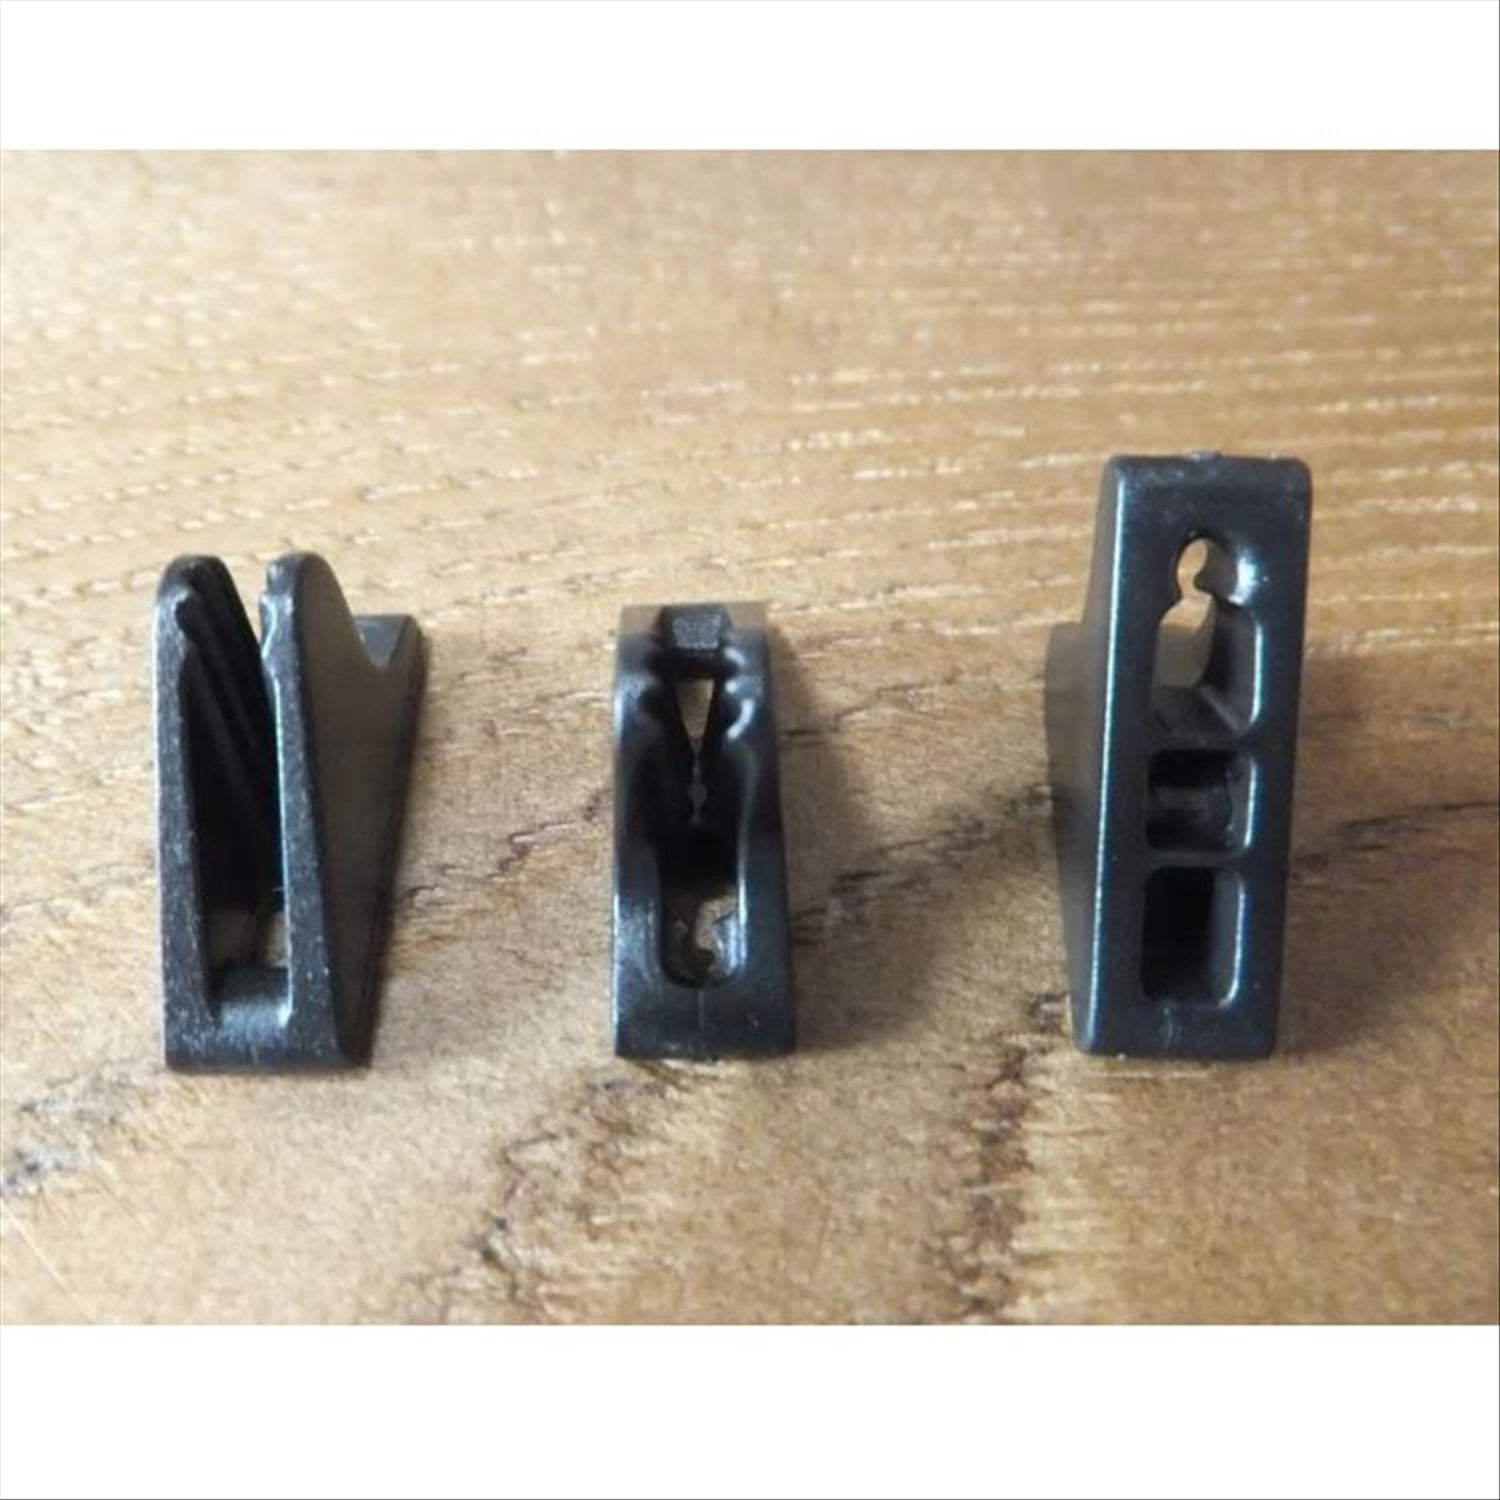 Intents Tensioners - Plastic Adjusters for 1-2mm Guy Rope